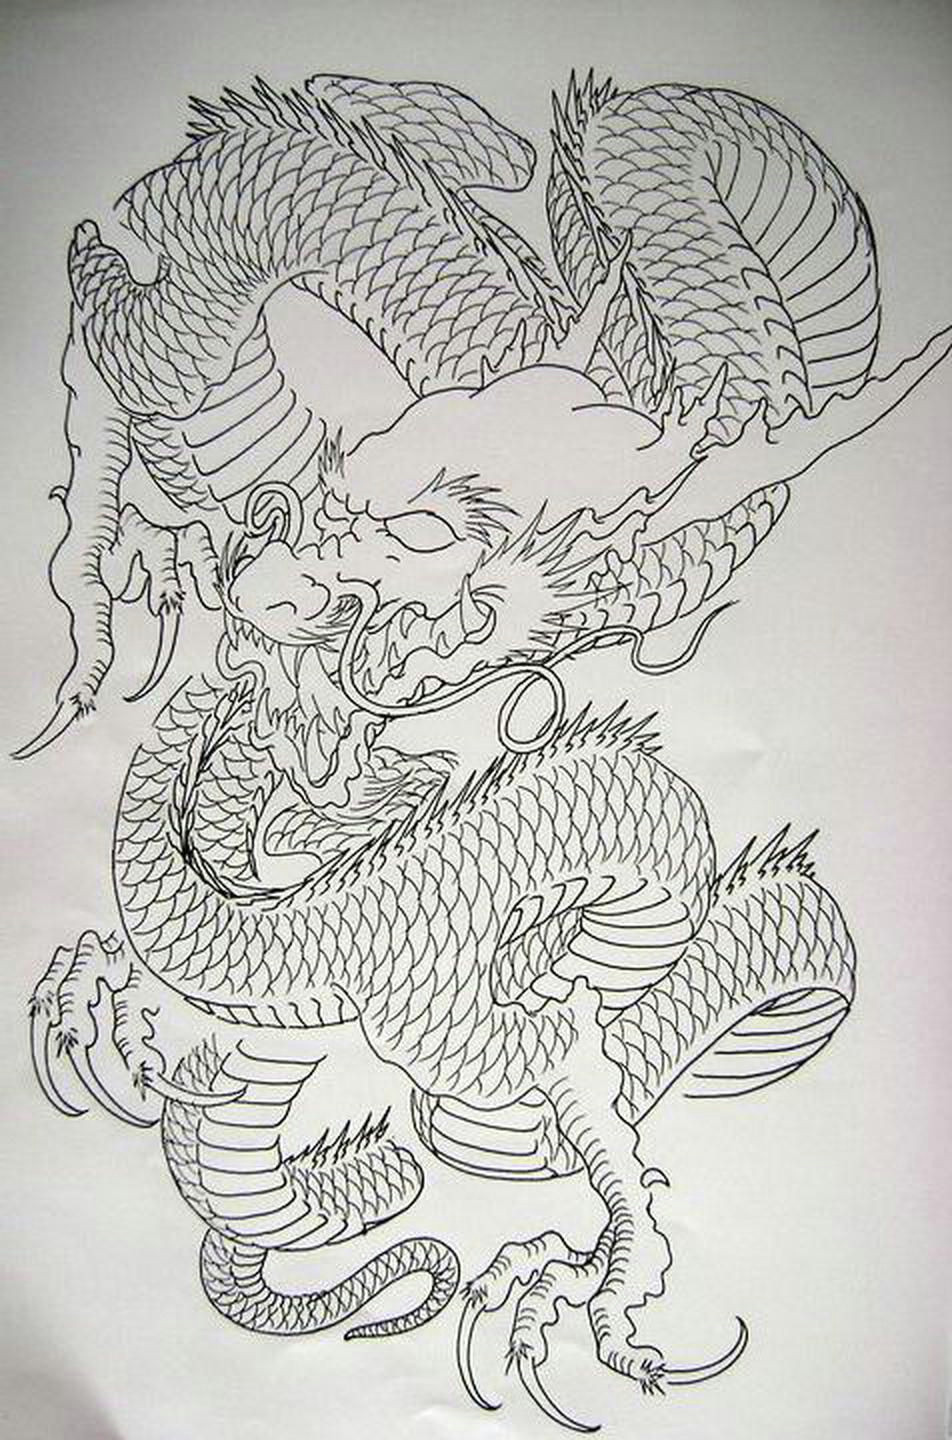 Drawings Of Japanese Dragons Dragon 9 From My Book Tattoos Pinterest Japanese Dragon